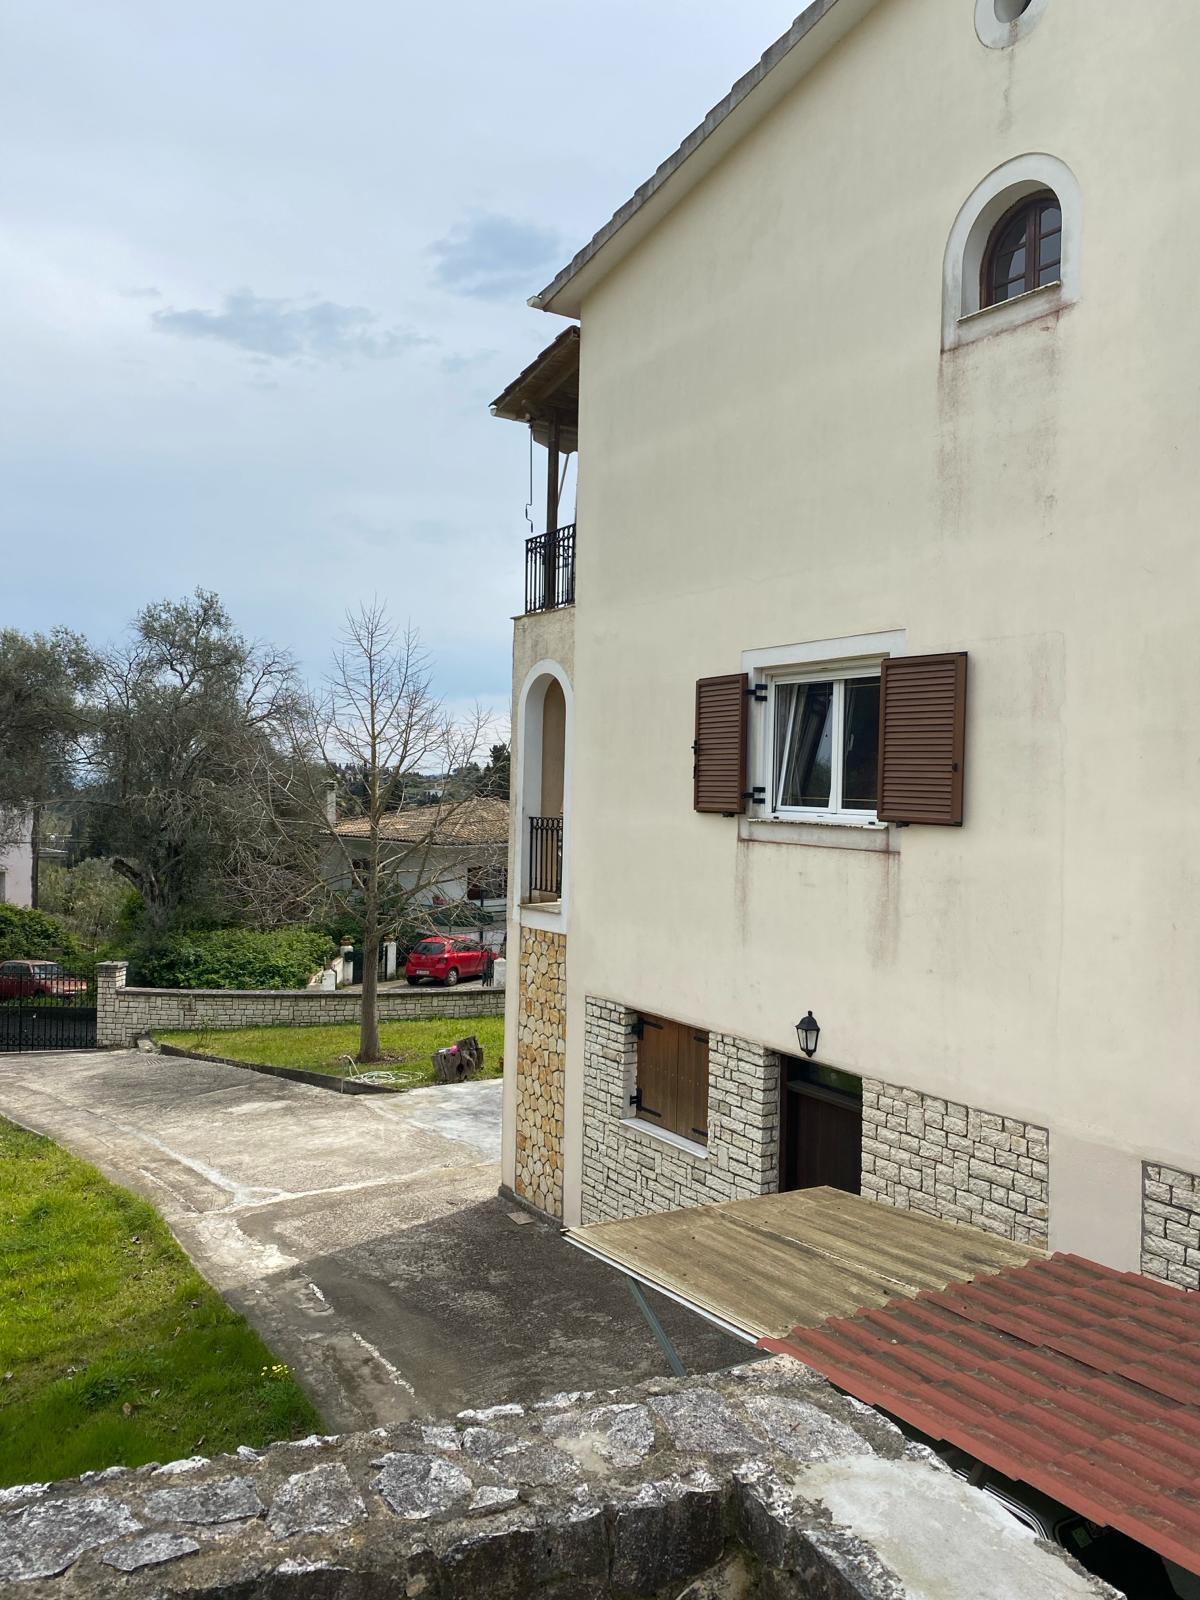 Large 3-story house located in Evropouli, just a few kilometres from Corfu Town - currently 3 apartm